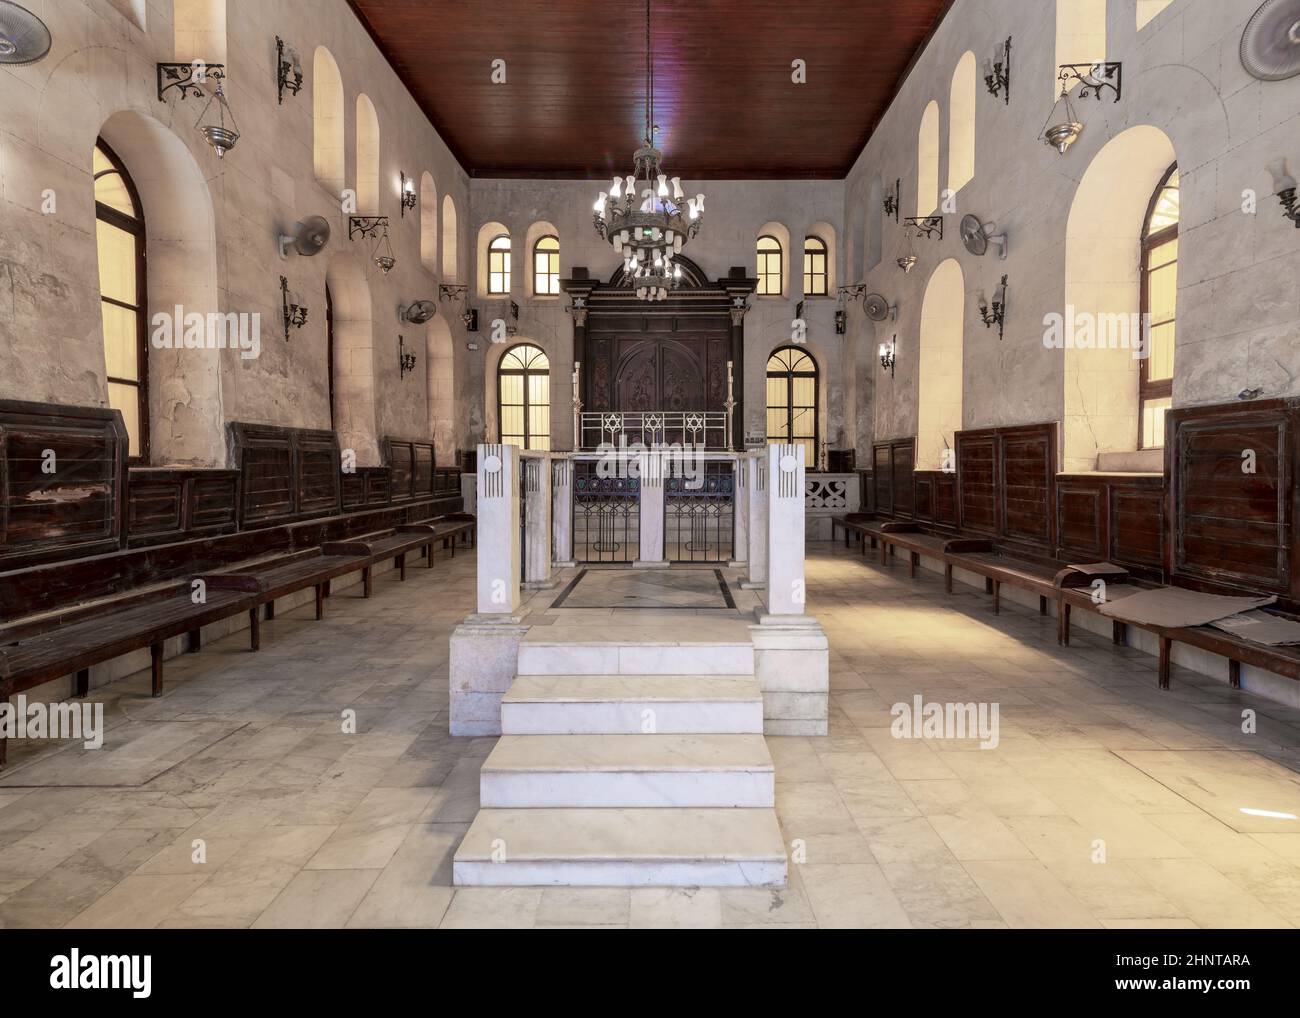 Interior of historic Jewish Maimonides Synagogue or Rav Moshe Synagogue with altar in front, Cairo Egypt Stock Photo